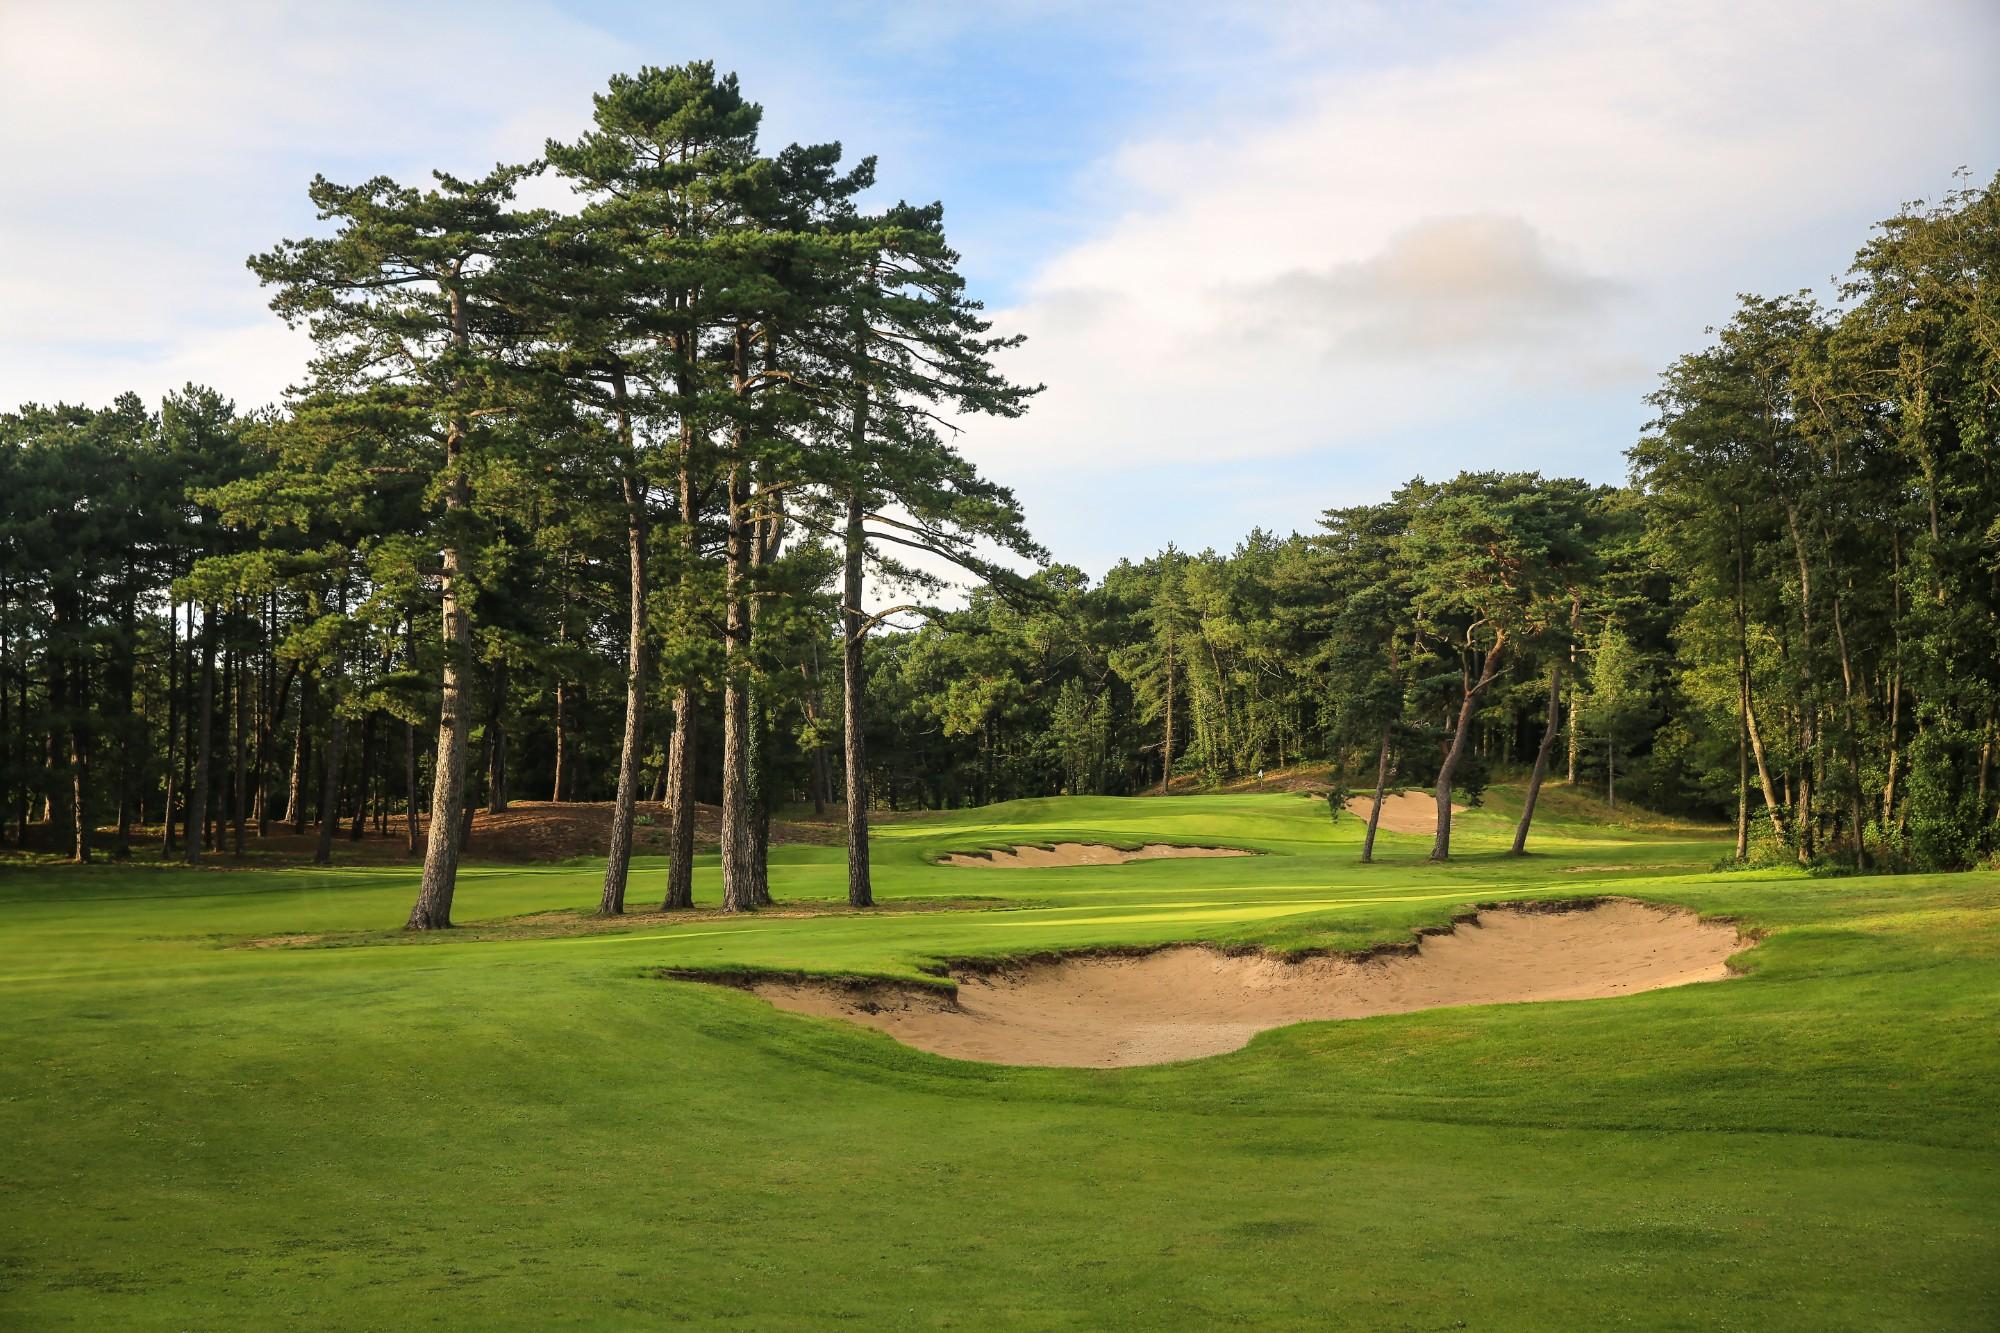 The Hardelot Les Dunes's scenic golf course in faultless Northern France.